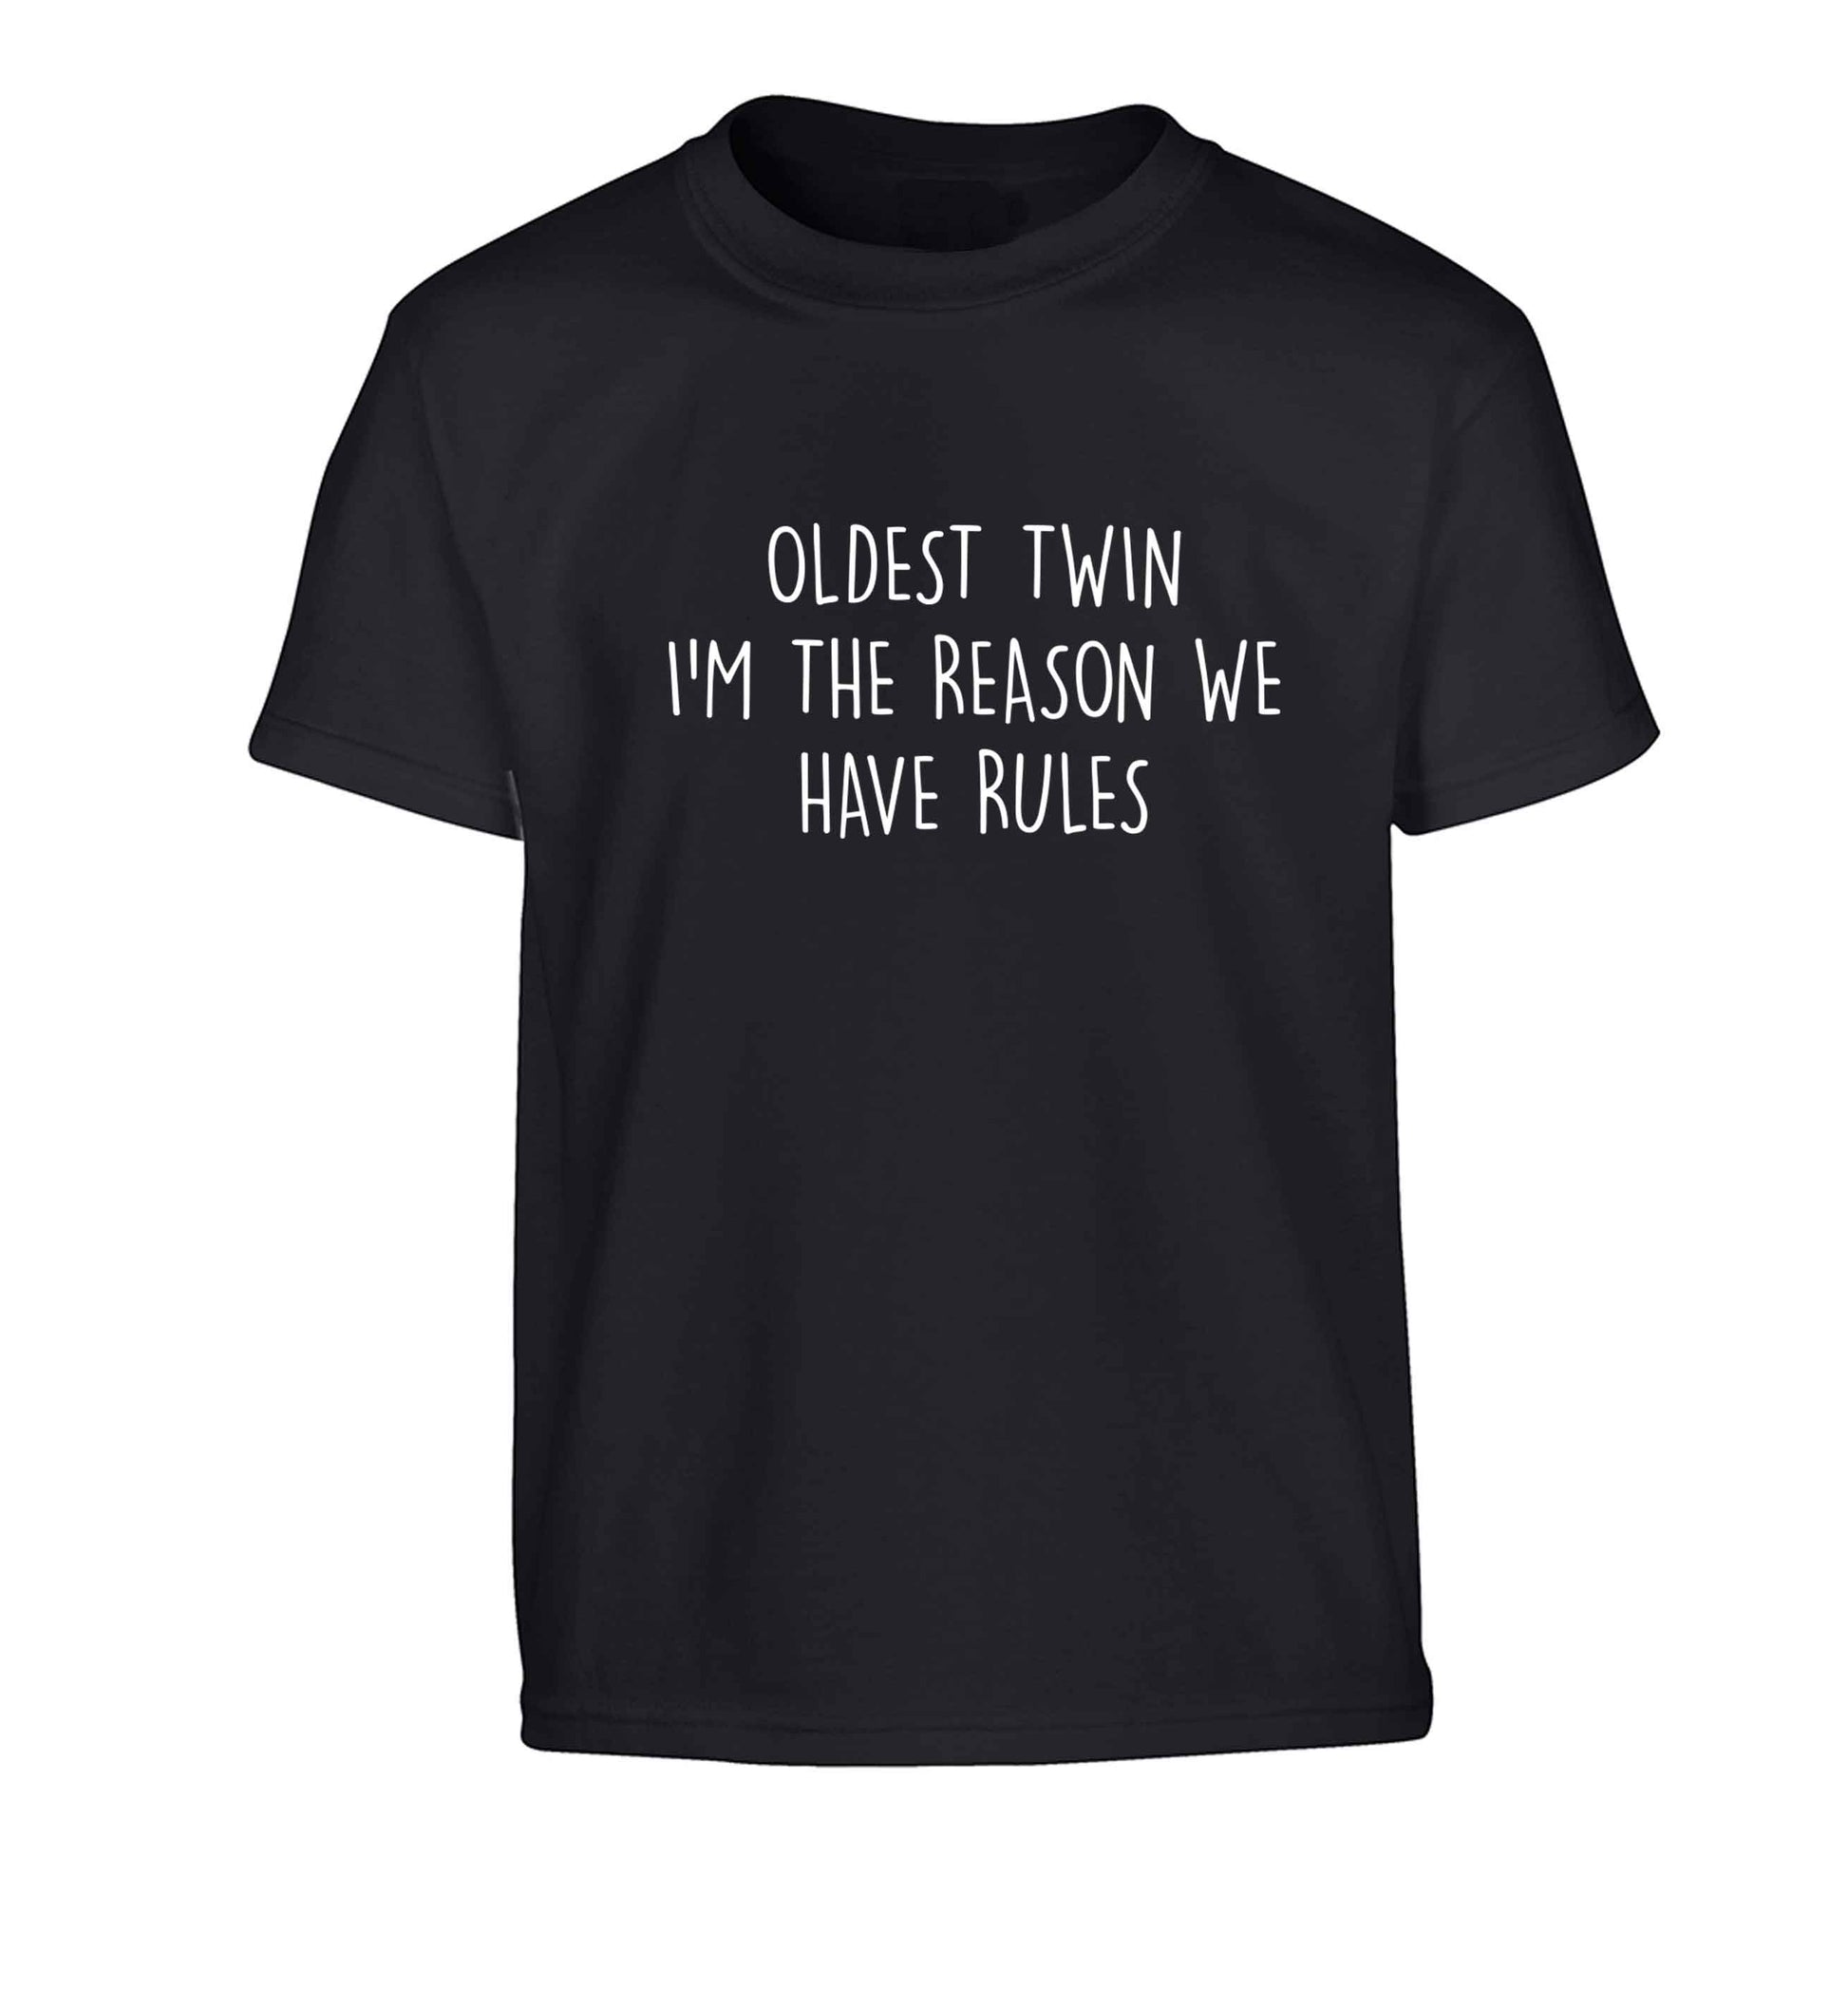 Oldest twin I'm the reason we have rules Children's black Tshirt 12-13 Years